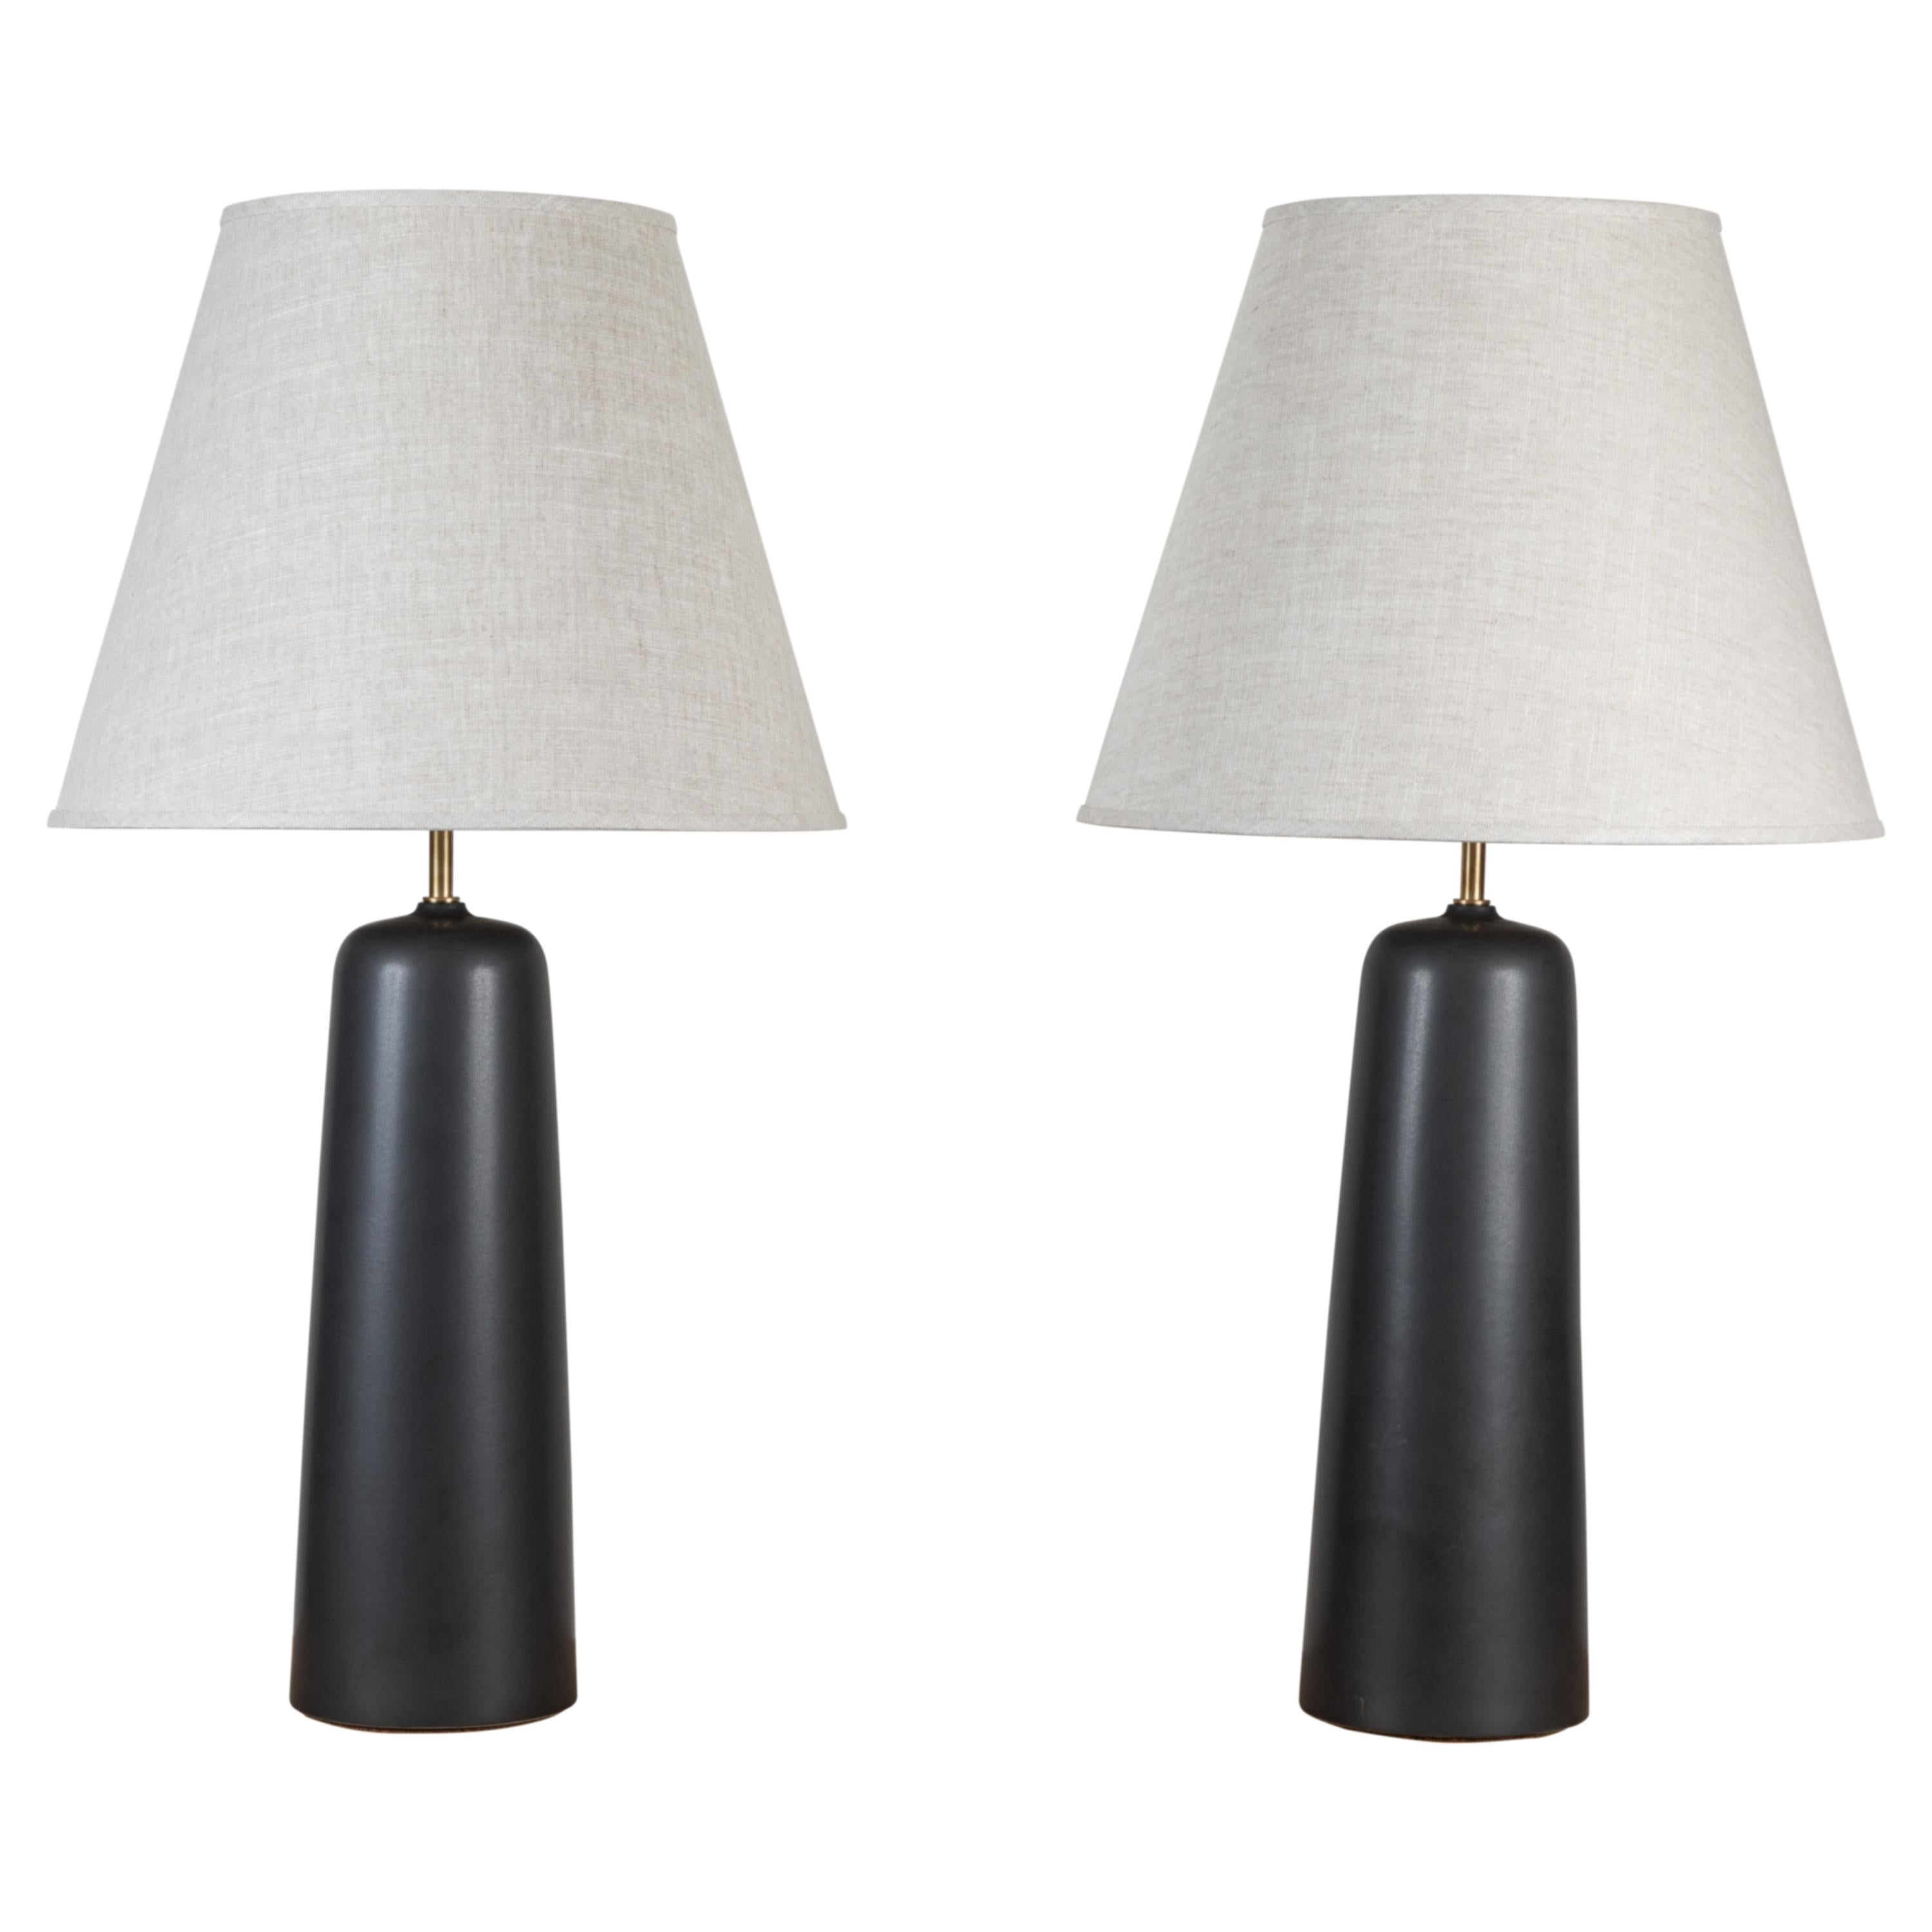 Pair of Bryce Lamps by Stone and Sawyer for Lawson-Fenning